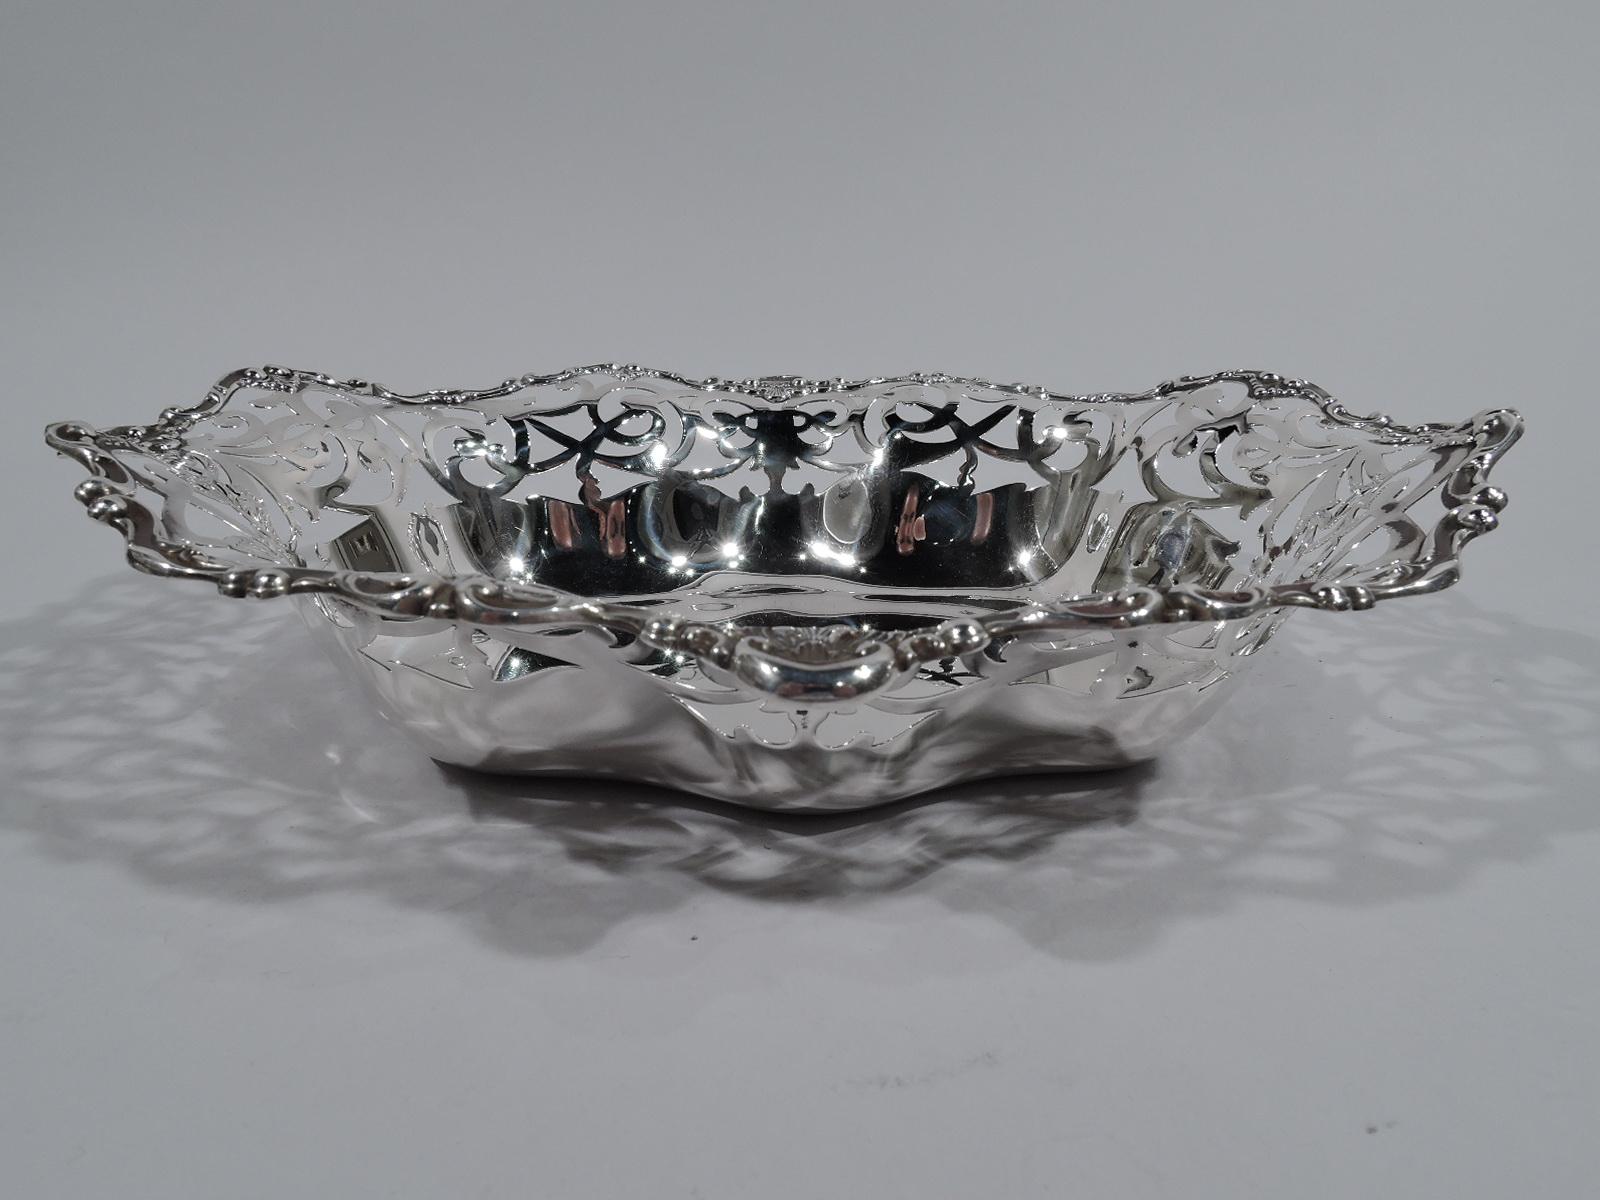 Edwardian Classical sterling silver bowl. Made by Gorham in Providence in 1906. Shaped and solid ovalish well. Sides have pierced and interlaced scrollwork. Wavy rim with applied scrolls and leaves. Fully marked including no. A4748 and date symbol.